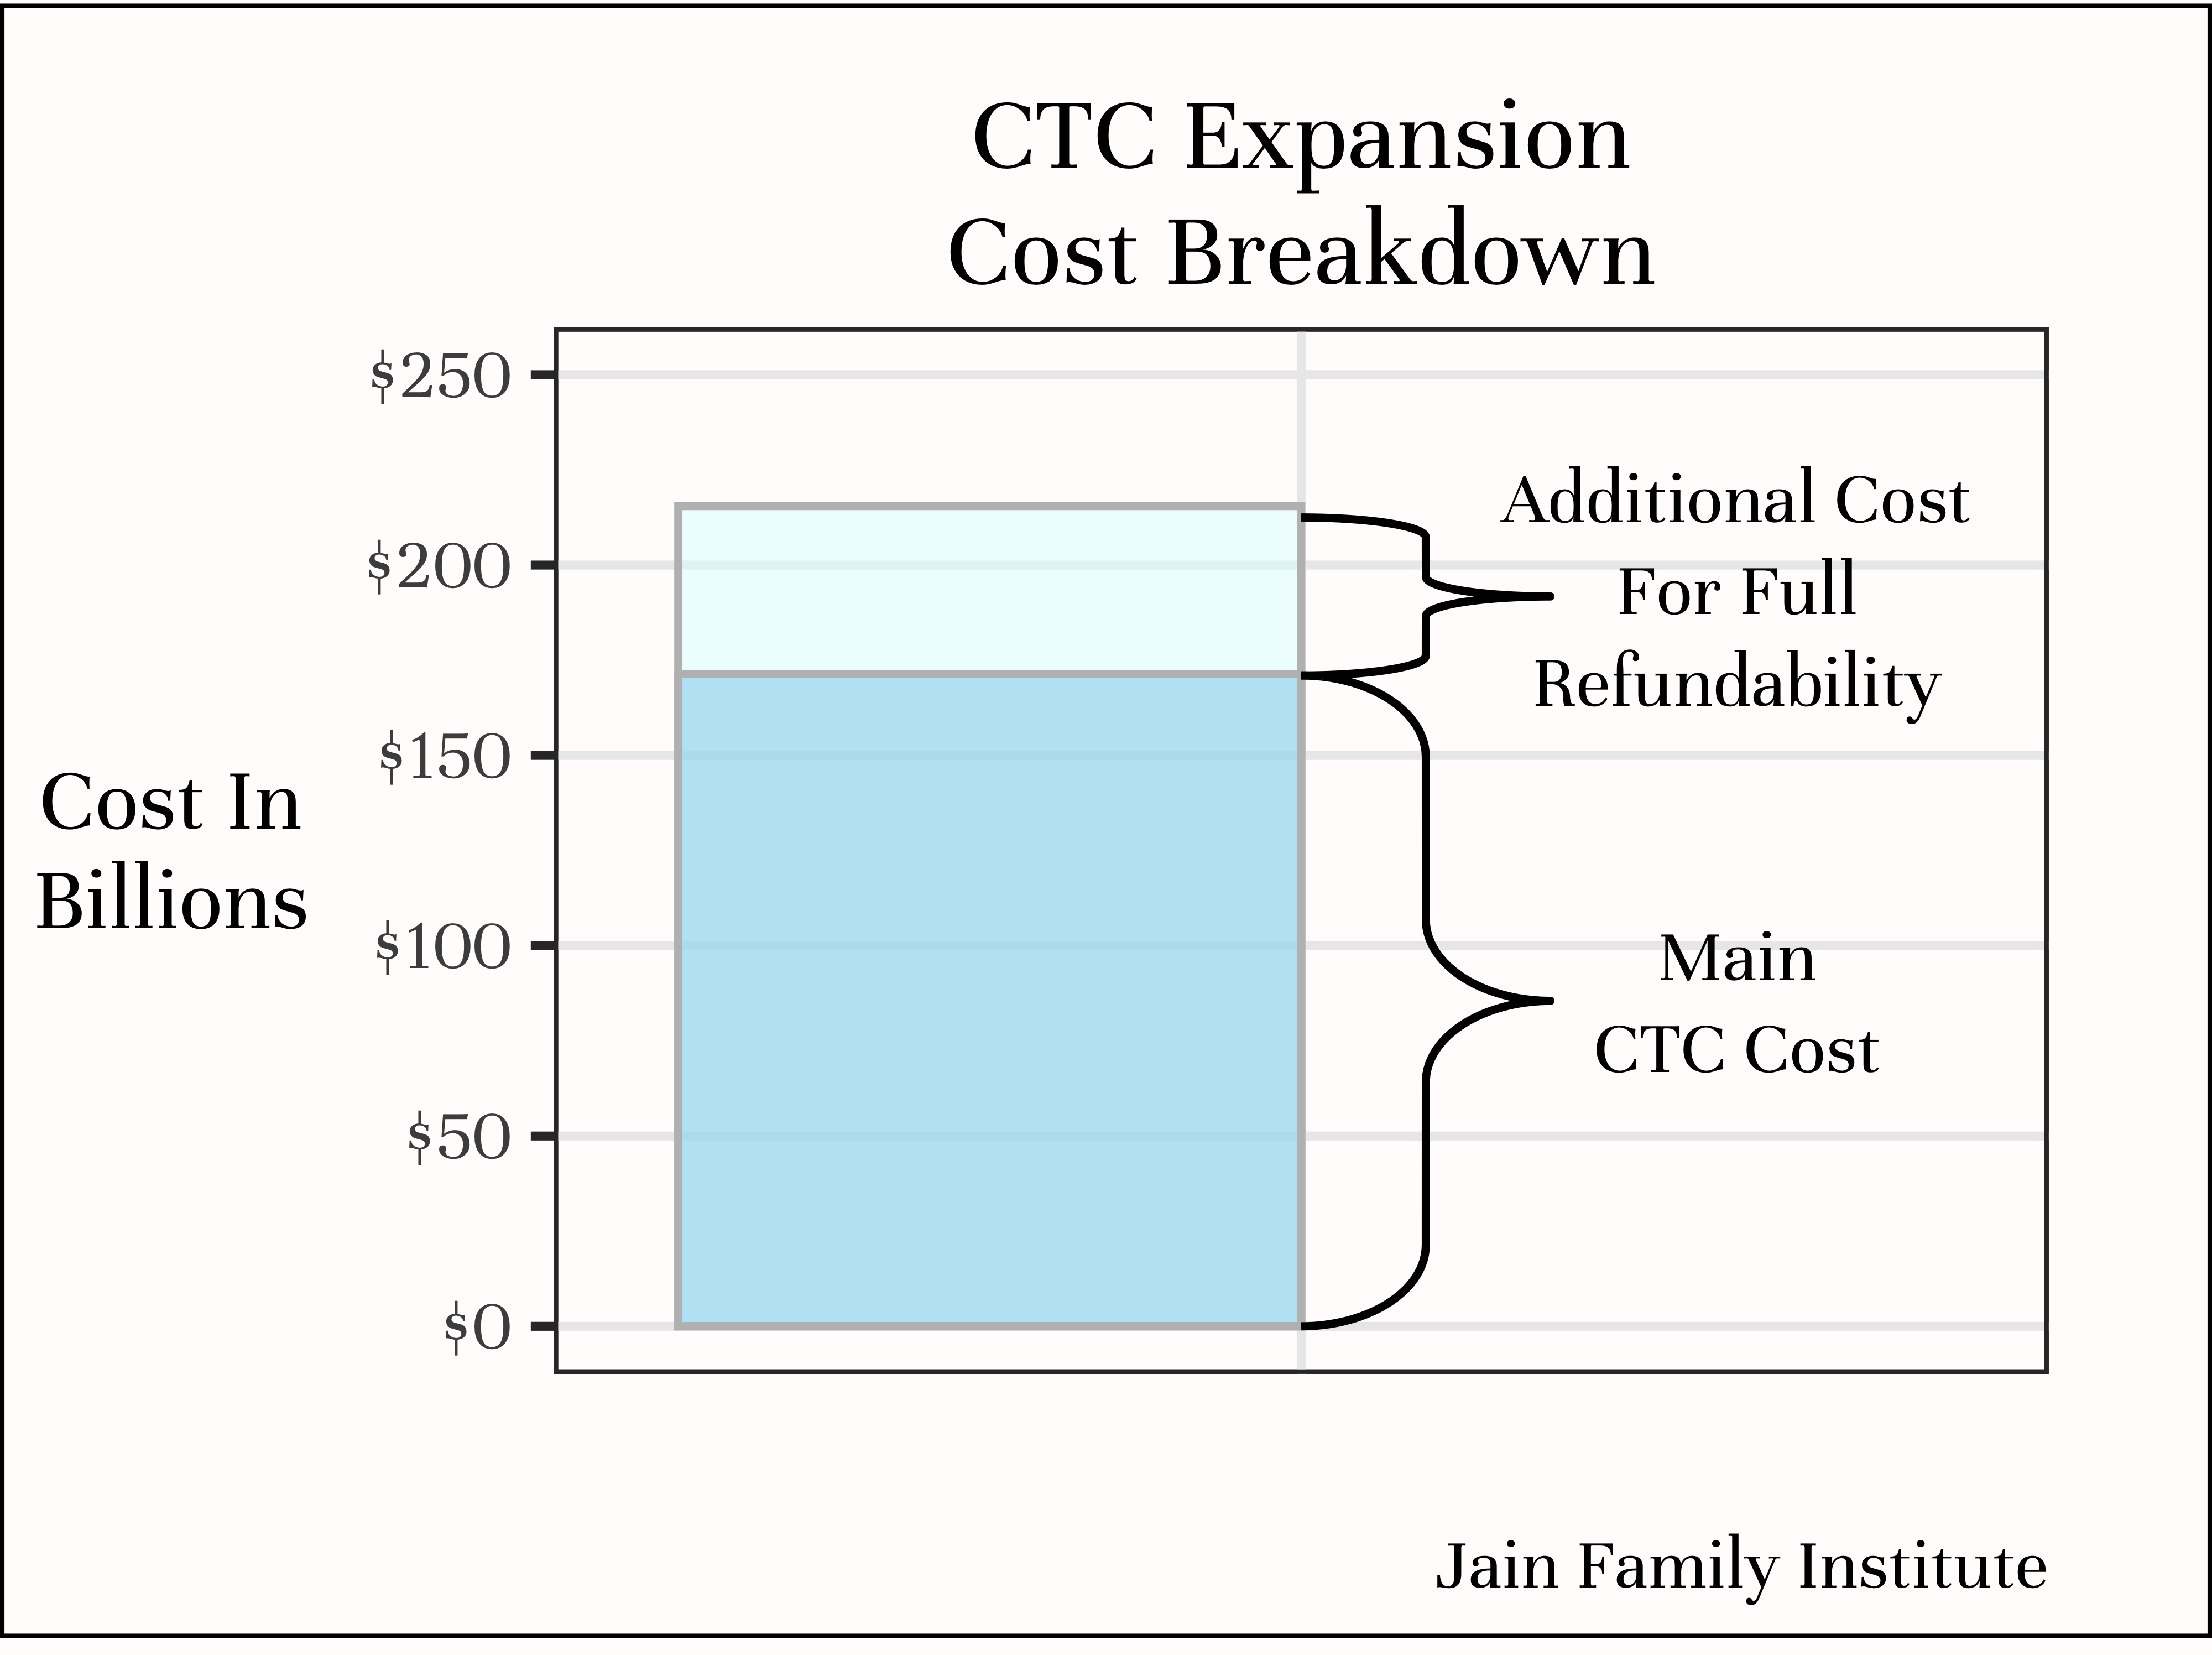 Cost breakdown of CTC expansion, showing little (relative) additional cost for full refundability.